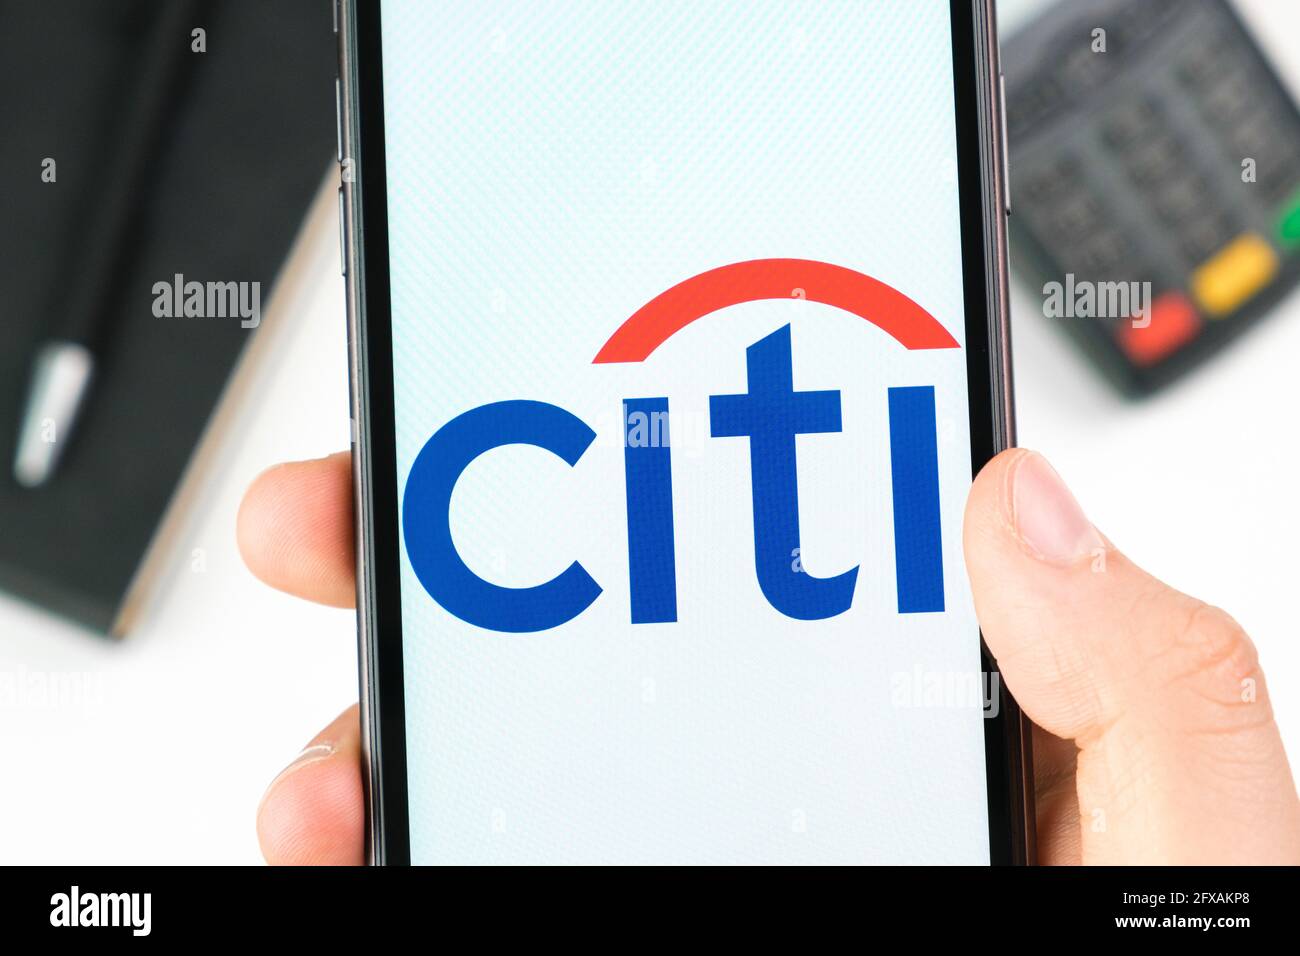 Citi bank logo on the smartphone screen in mans hand on the background of payment terminal, May 2021, San Francisco, USA Stock Photo